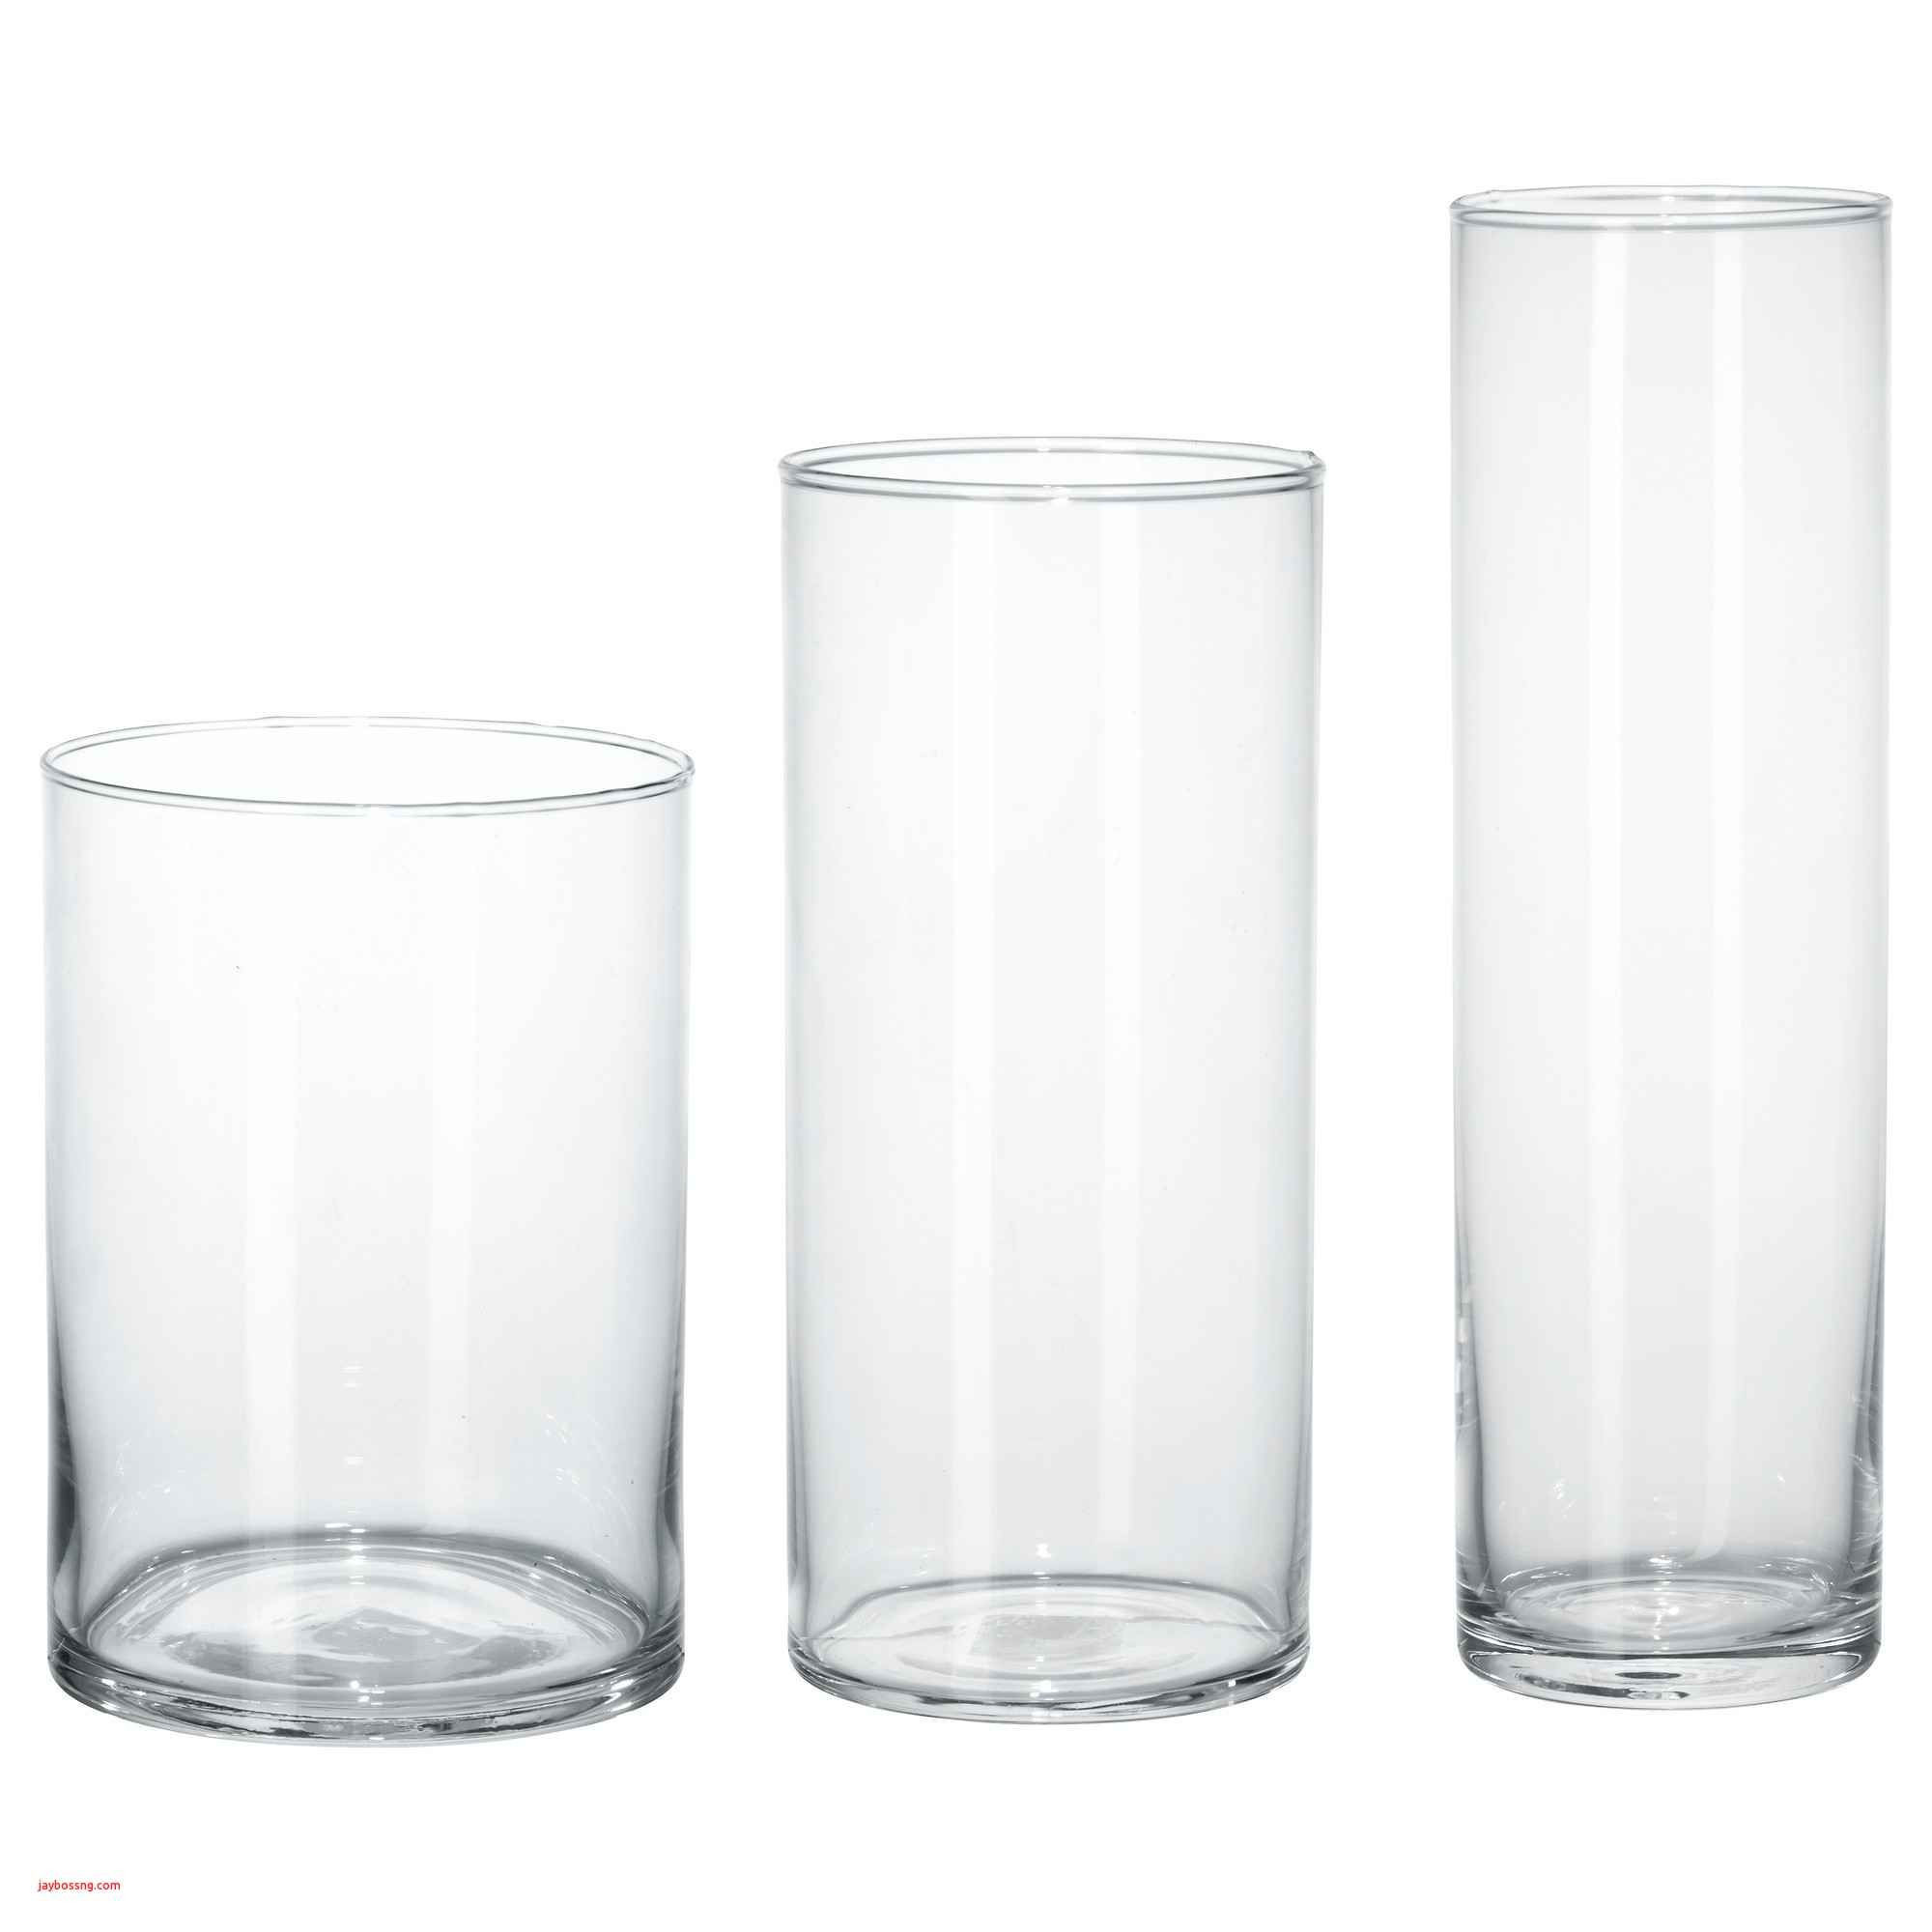 27 Nice Black Glass Square Vase 2024 free download black glass square vase of brown glass vase fresh ikea white table created pe s5h vases ikea with regard to brown glass vase fresh ikea white table created pe s5h vases ikea vase i 0d bladet